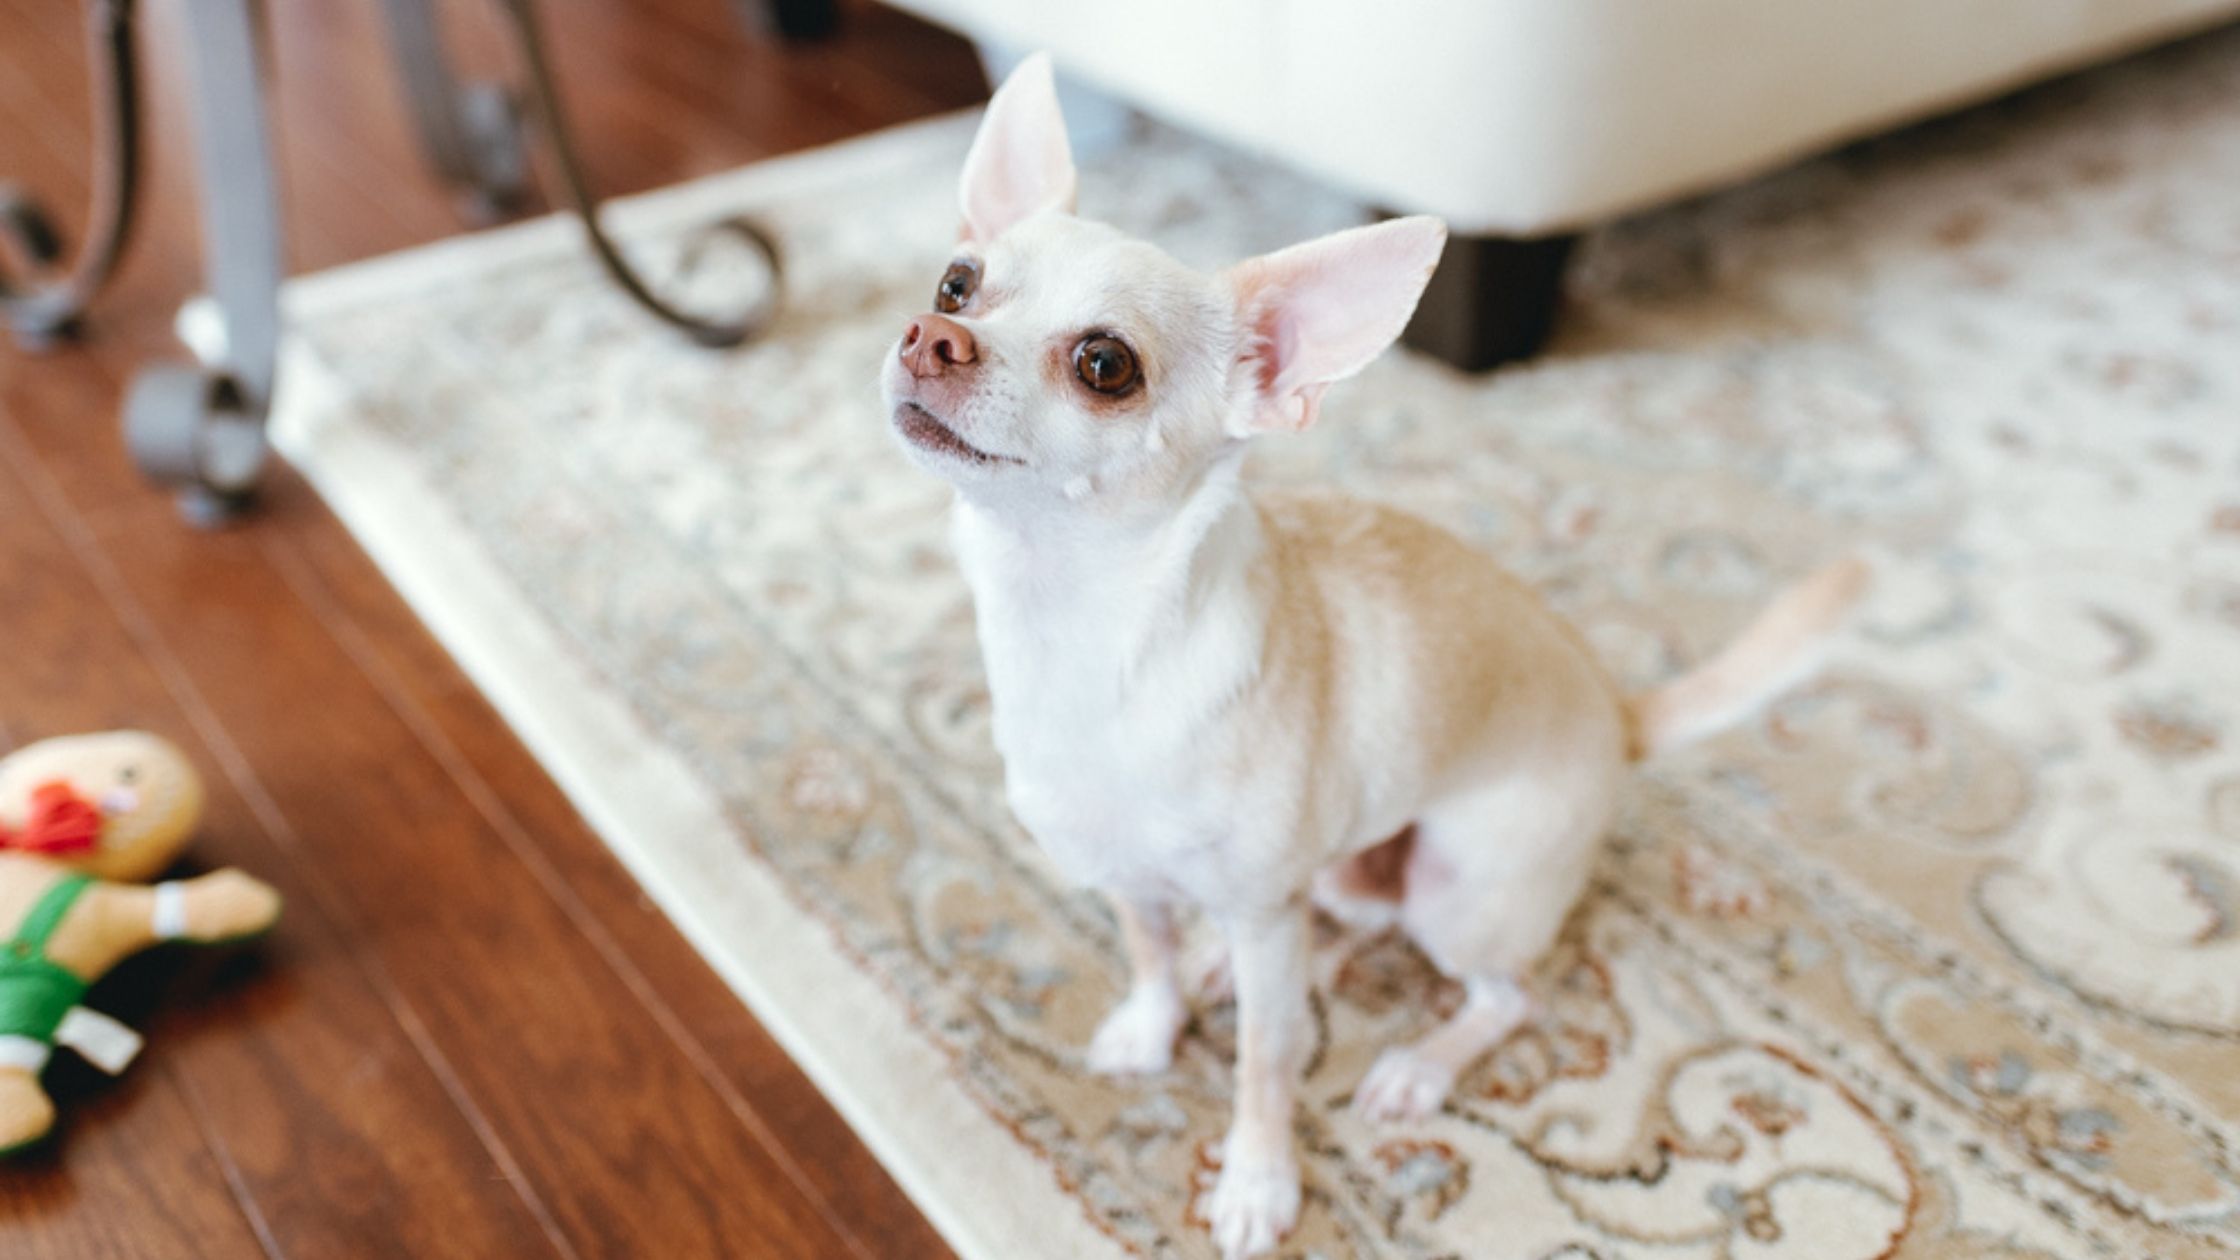 When it comes to basic commands, Sit is usually one of the very first cues people teach their dogs. Find out how to teach your dog to Sit!